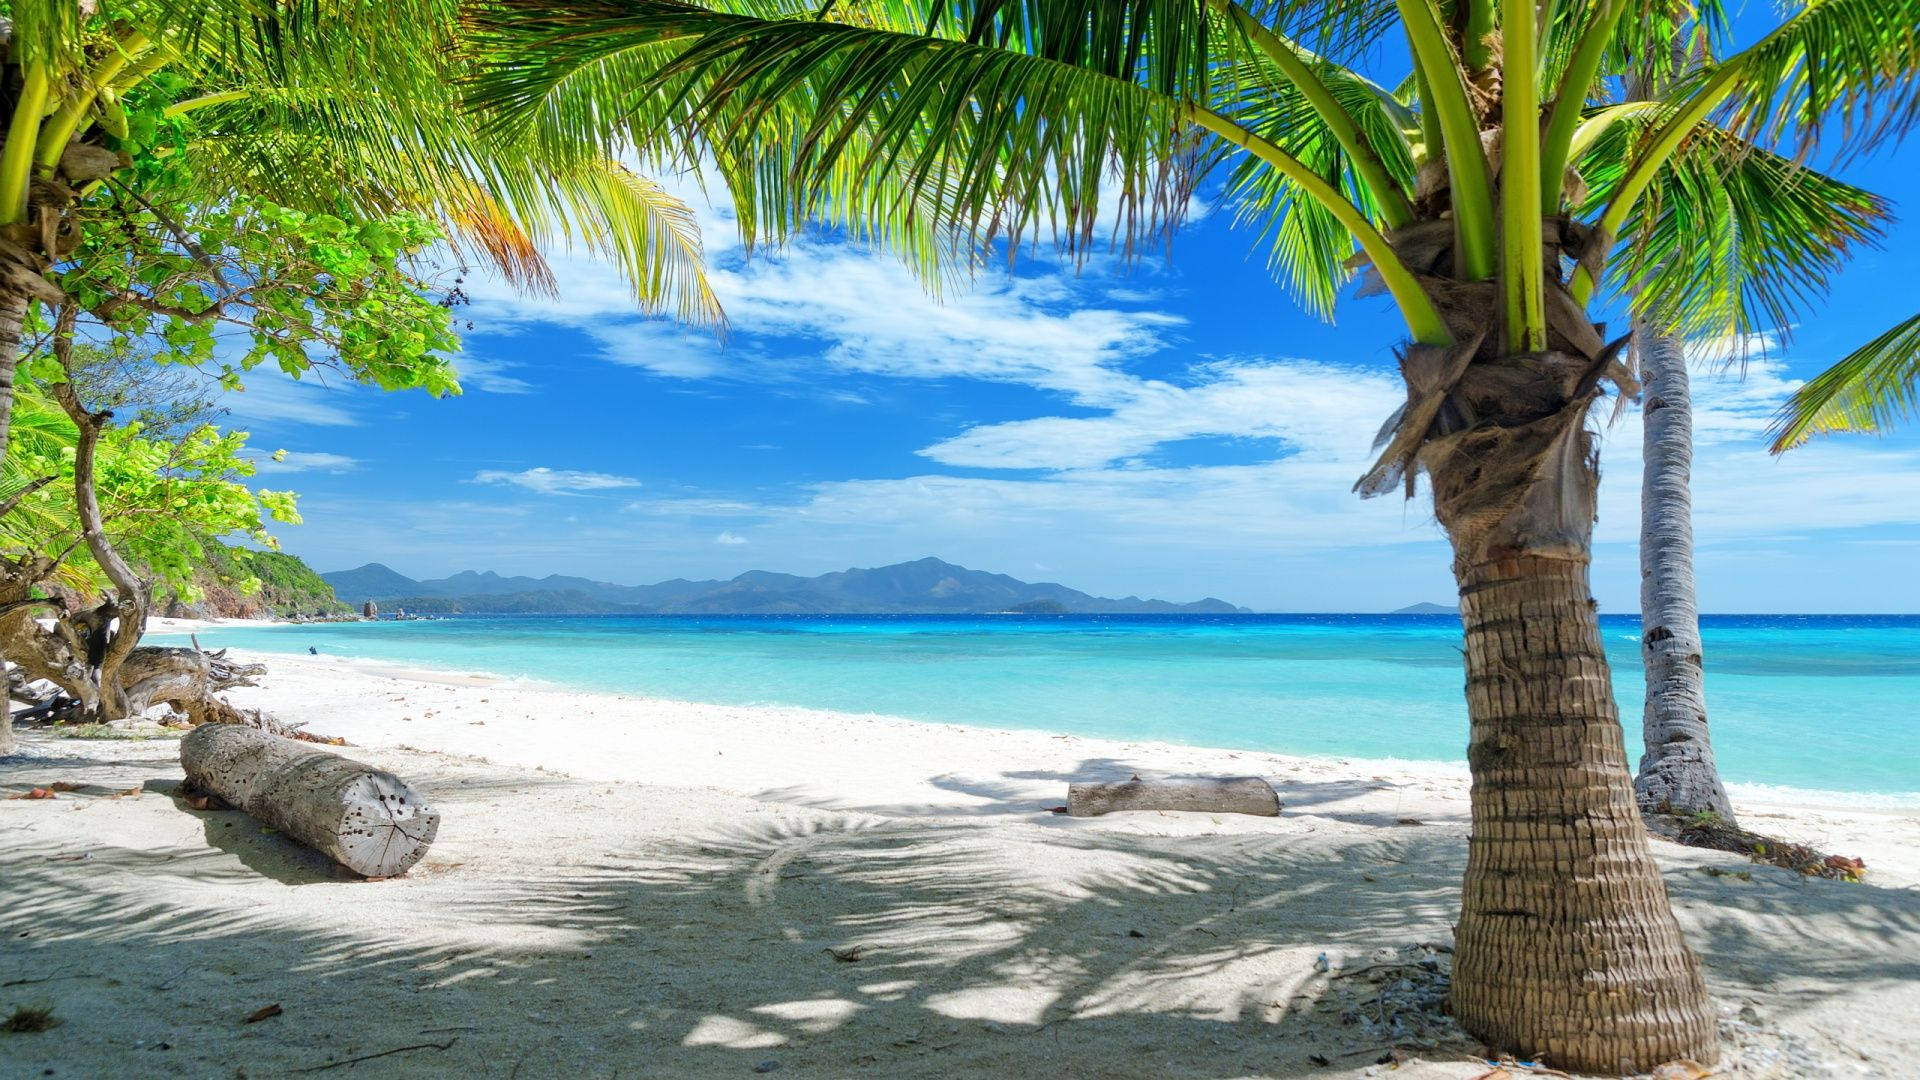 Tropical 1920X1080 Wallpaper and Background Image